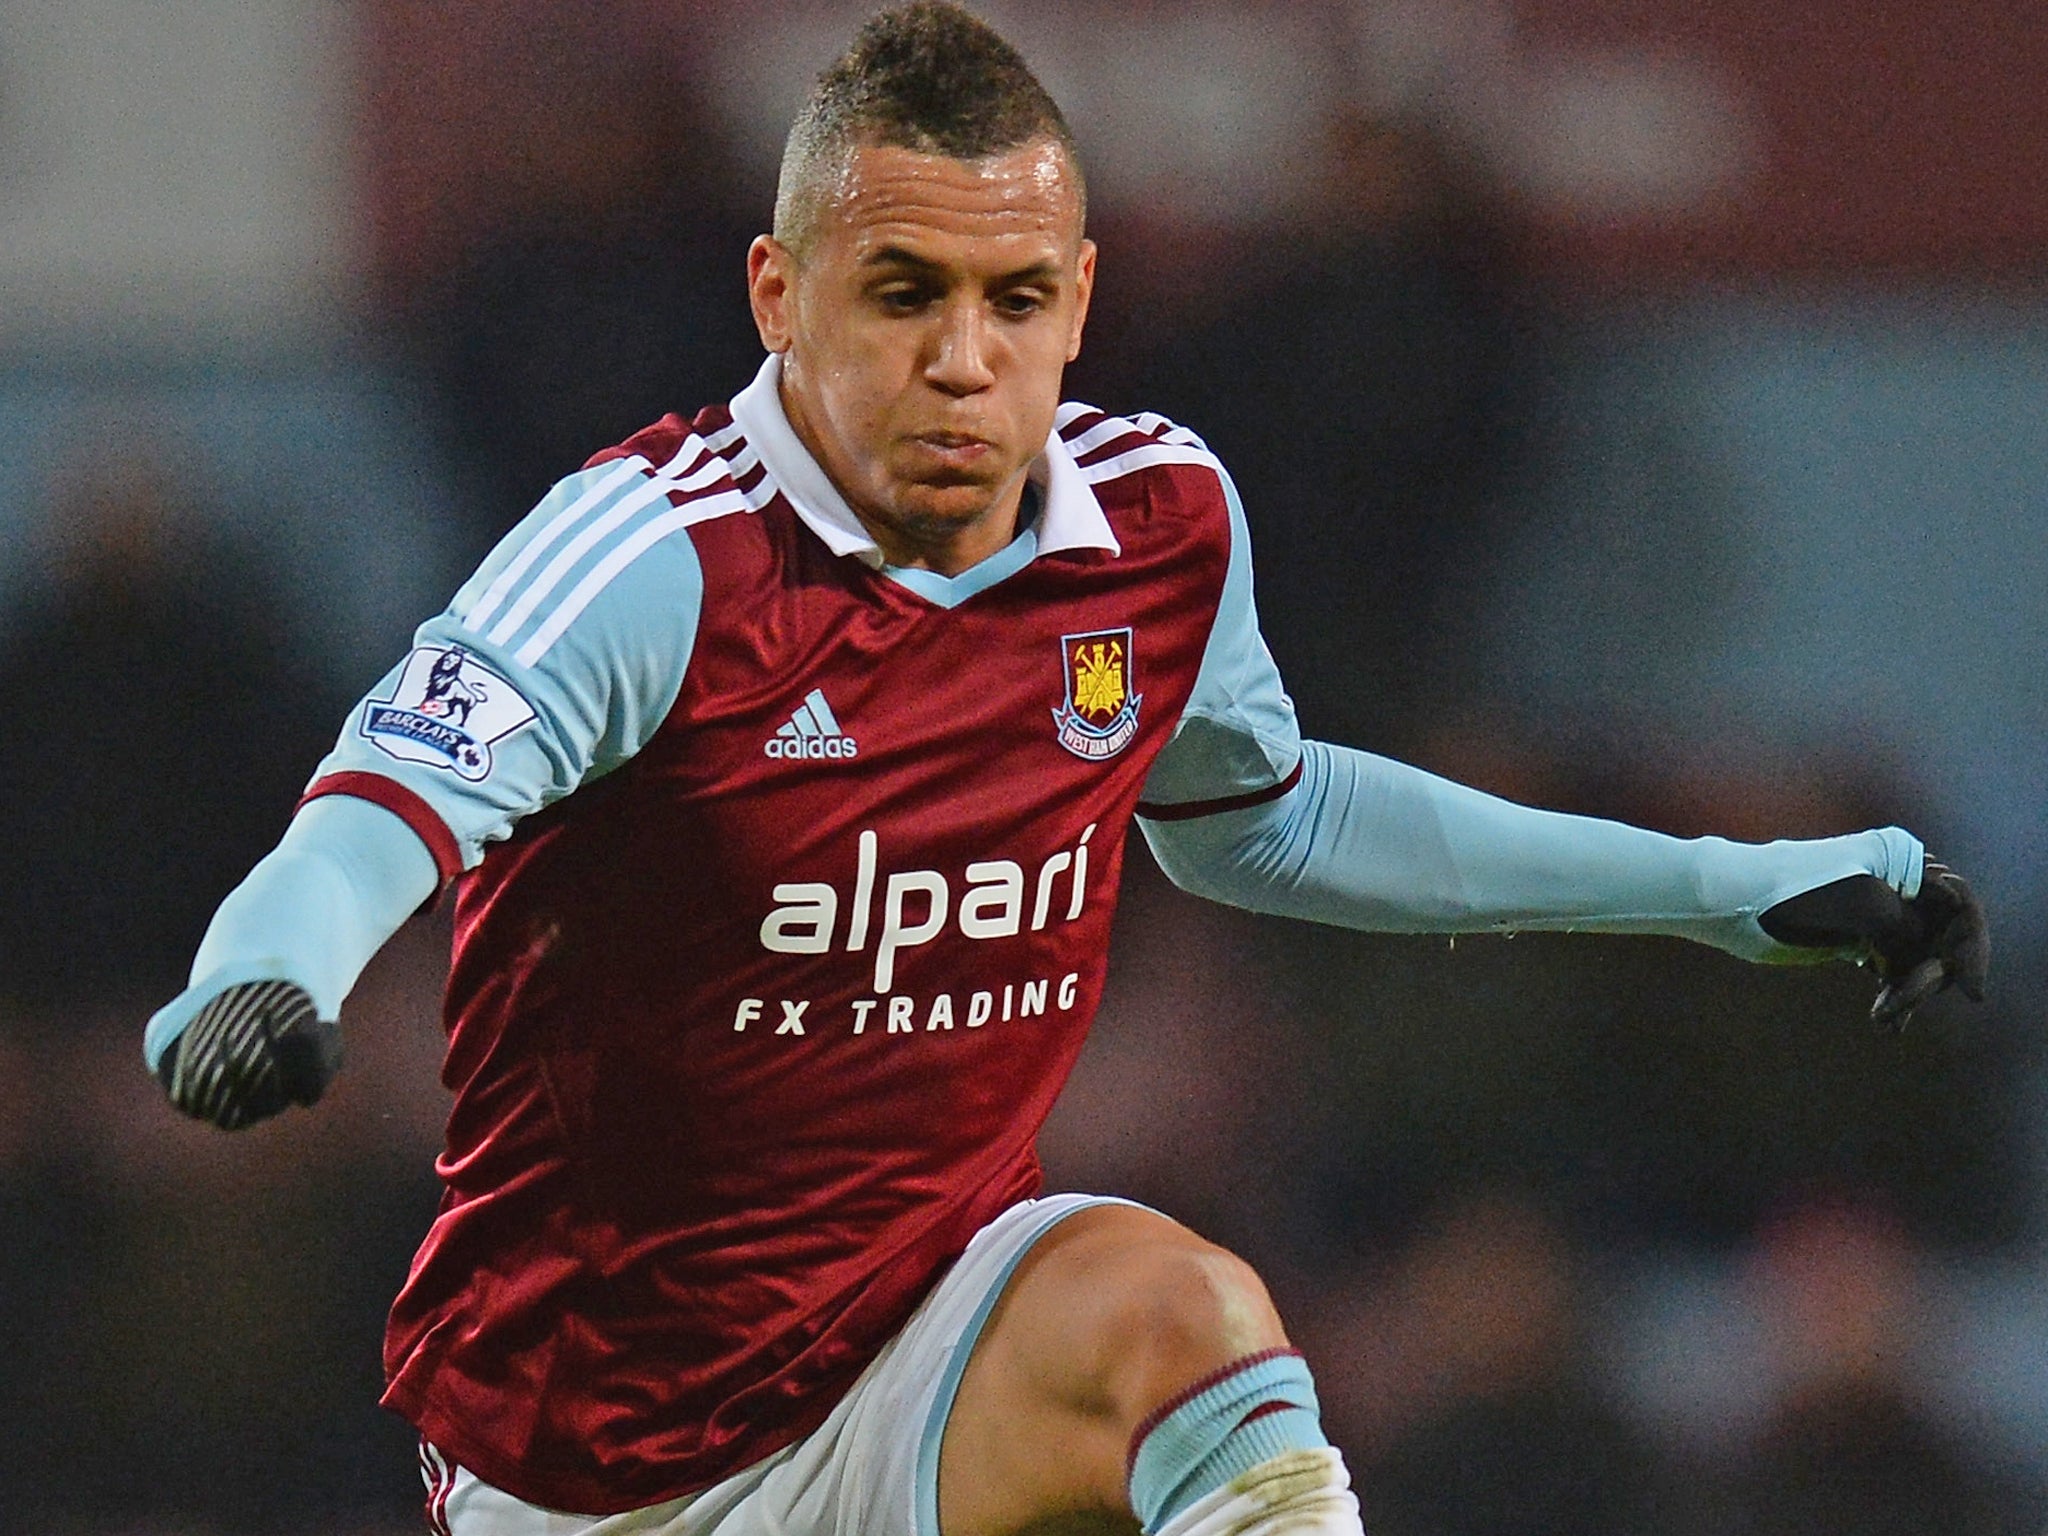 Ravel Morrison was coached by Rene Meulensteen at Manchester United